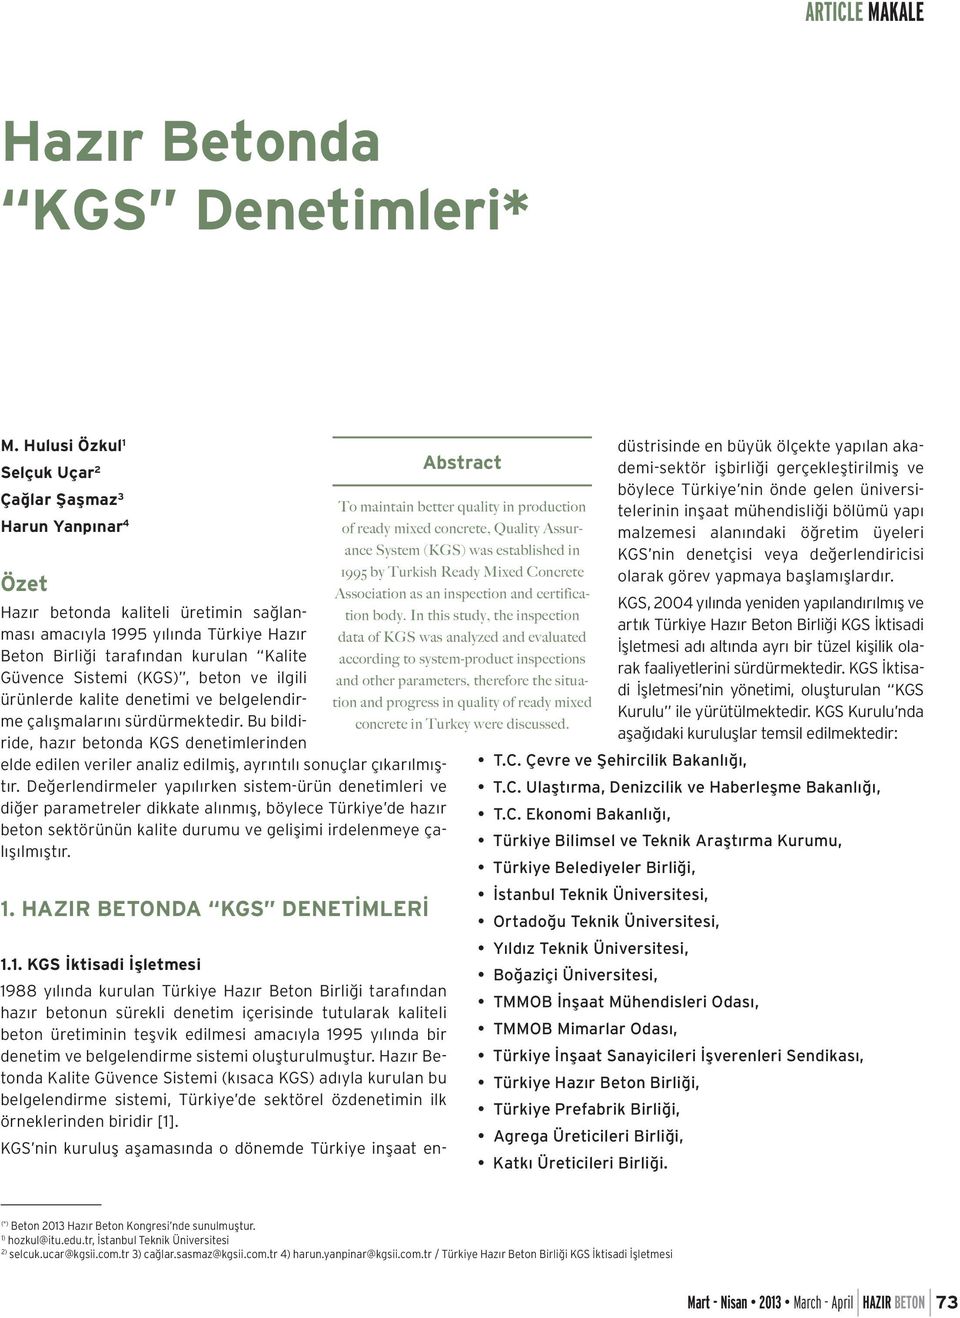 to system-product inspections Güvence Sistemi (KGS), beton ve ilgili and other parameters, therefore the situation and progress in quality of ready mixed ürünlerde kalite denetimi ve belgelendirme